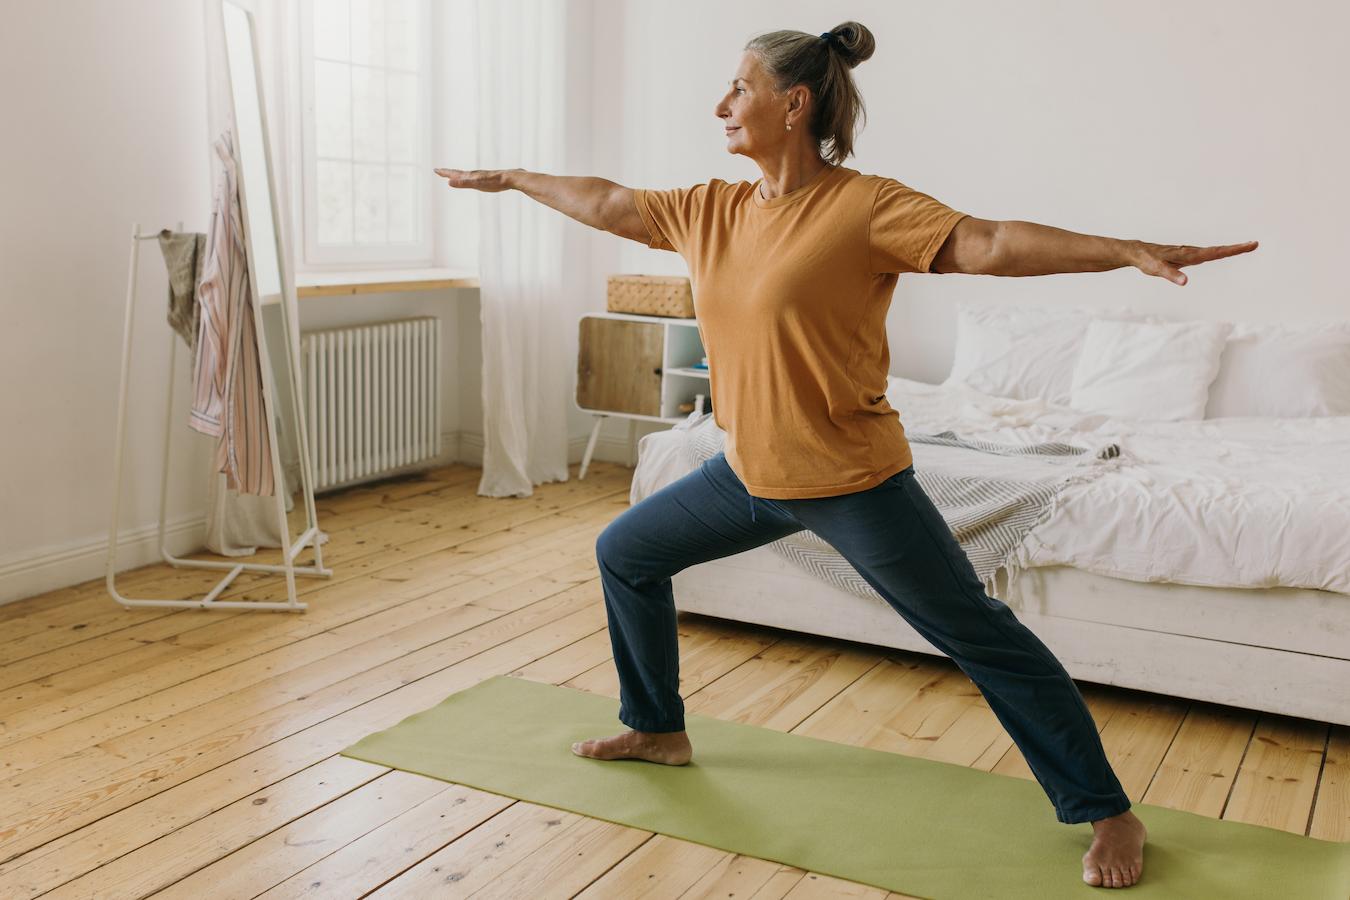 an older woman doing yoga in her bedroom spiritual practices deep sense profound sense whole life waking life personal transformation true nature dark night valuable insight greater sense